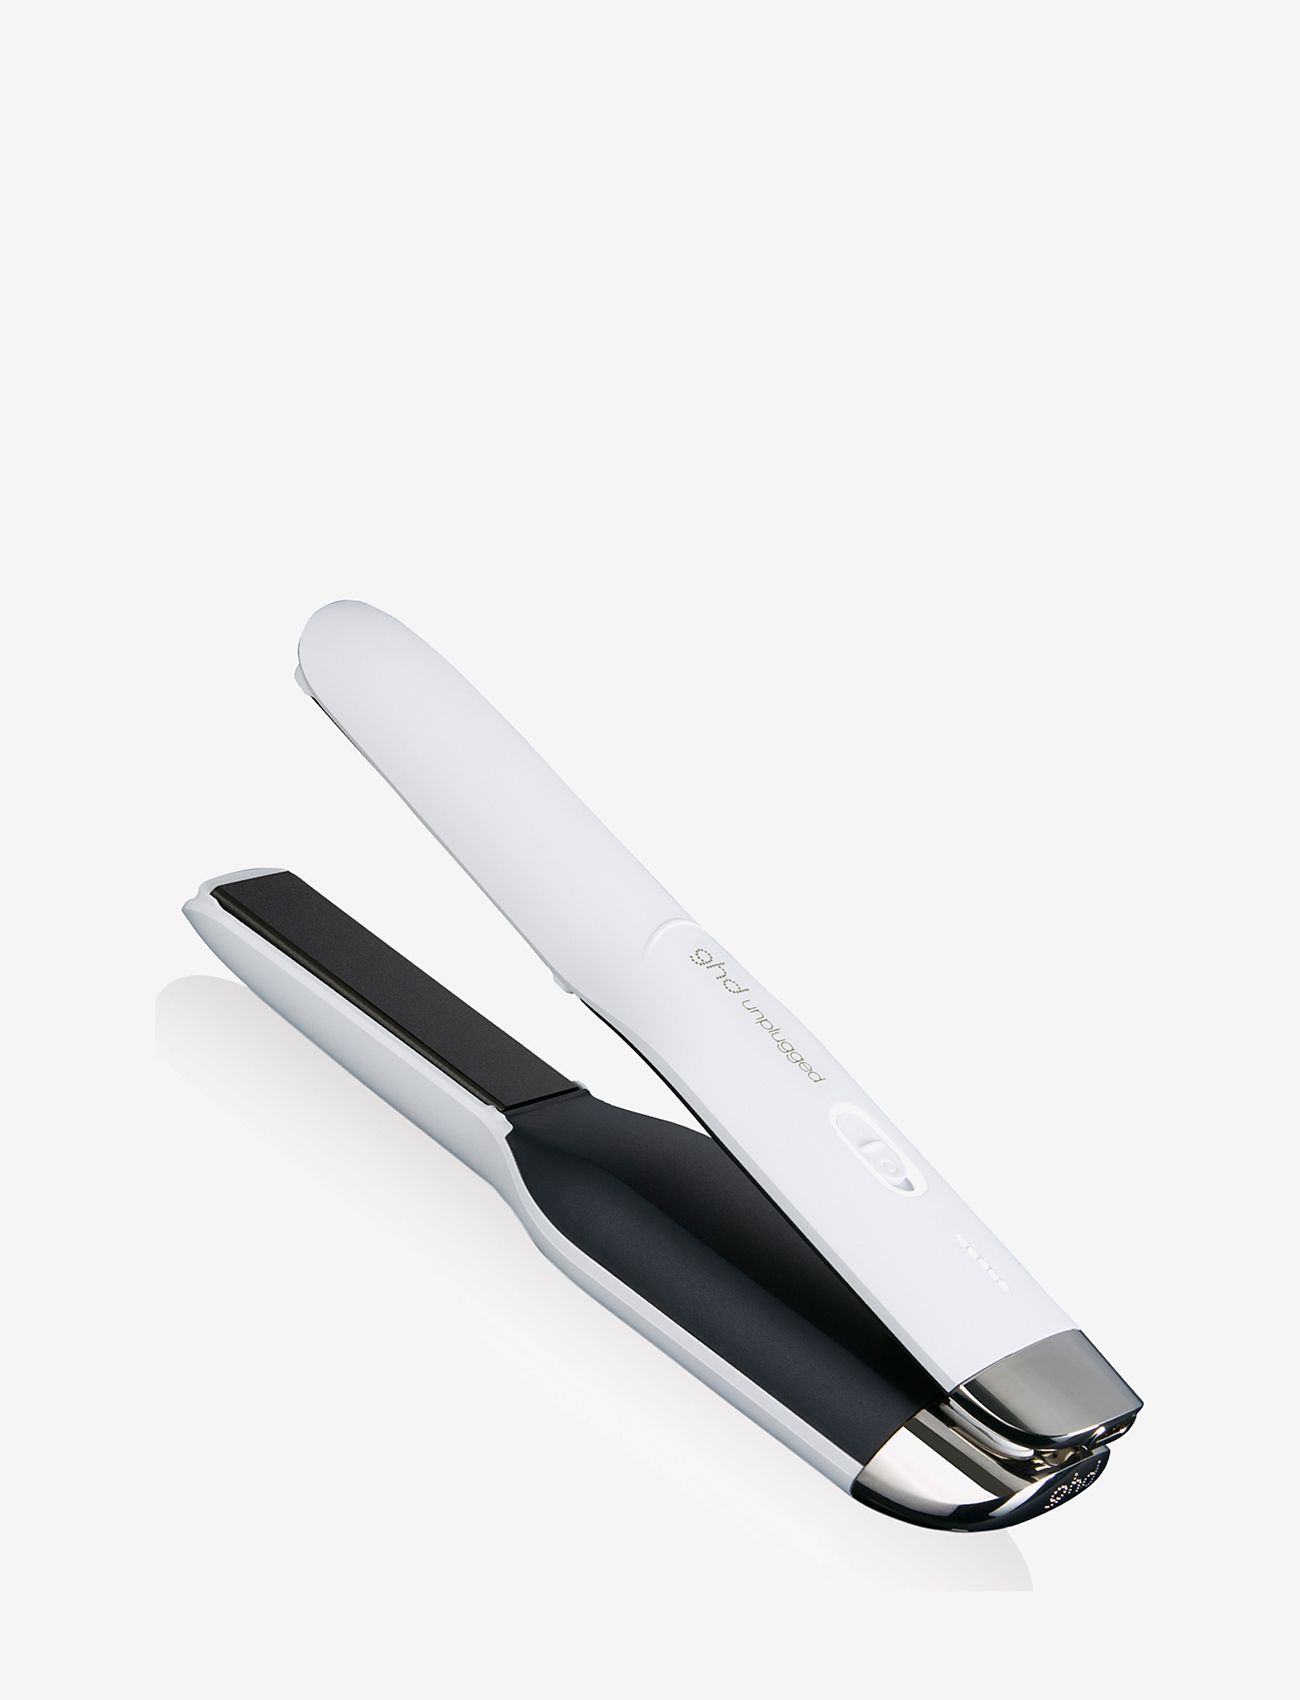 ghd - ghd Unplugged straightener in matte white - tools - white - 0